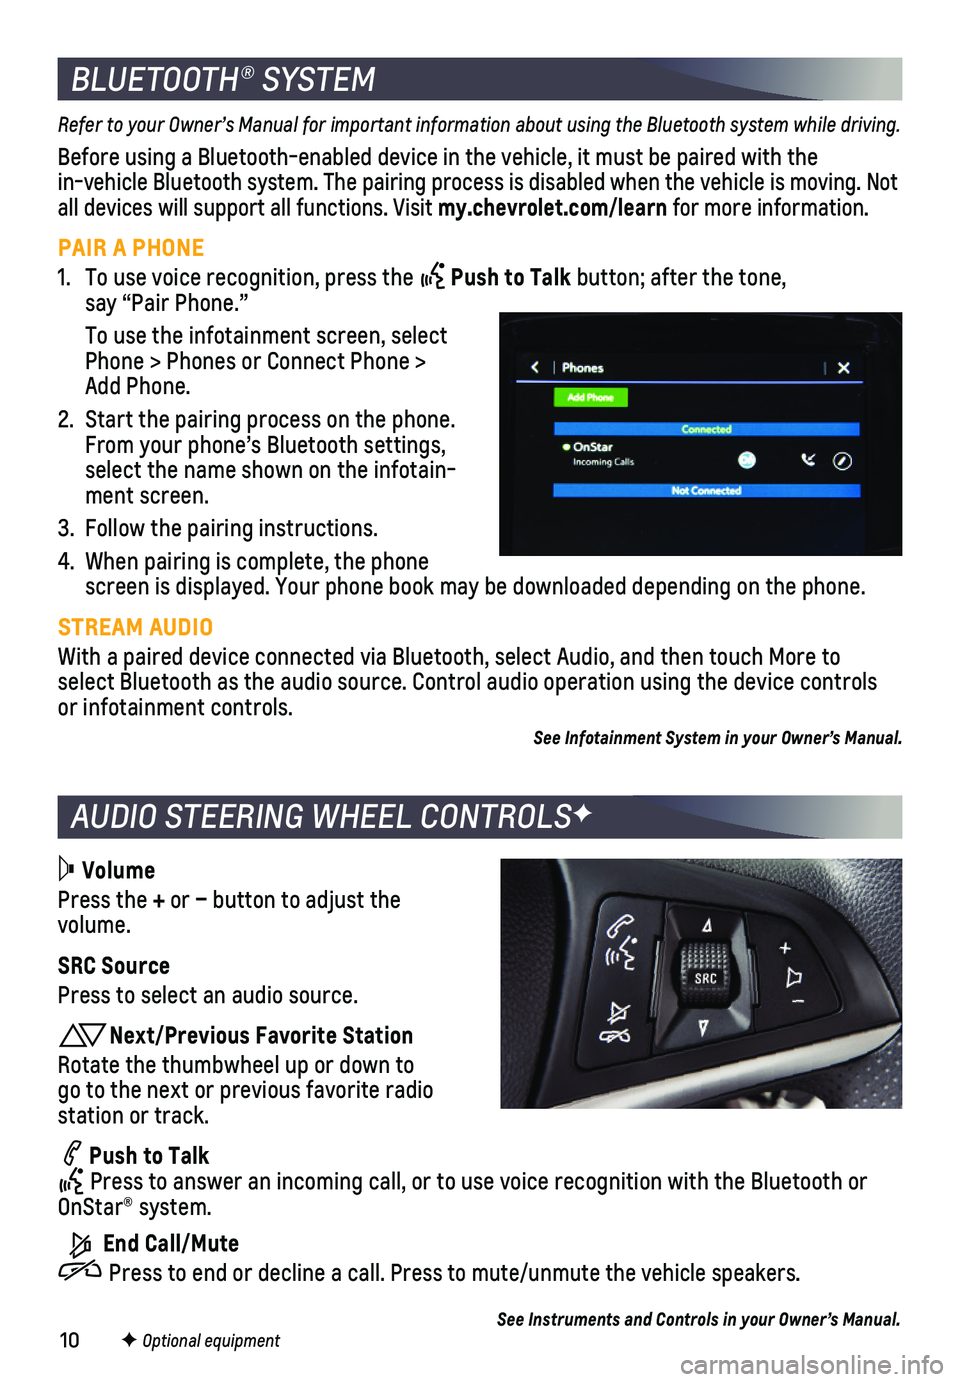 CHEVROLET SPARK 2020  Get To Know Guide 10
AUDIO STEERING WHEEL CONTROLSF
BLUETOOTH® SYSTEM
Refer to your Owner’s Manual for important information about using the Bluetooth system while driving.
Before using a Bluetooth-enabled device in